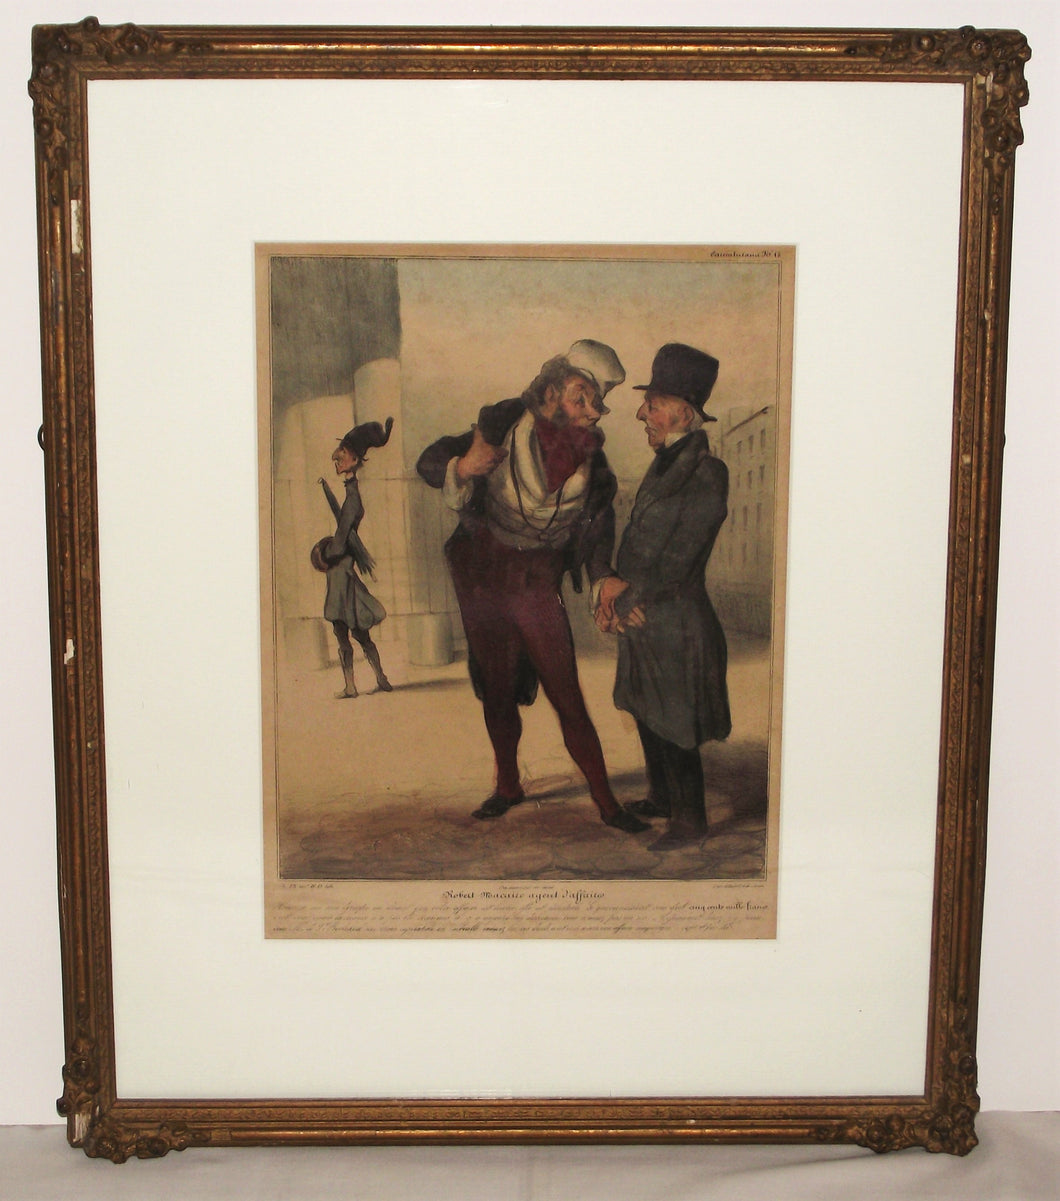 A Framed Hand-Coloured Lithograph by Honoré Daumier